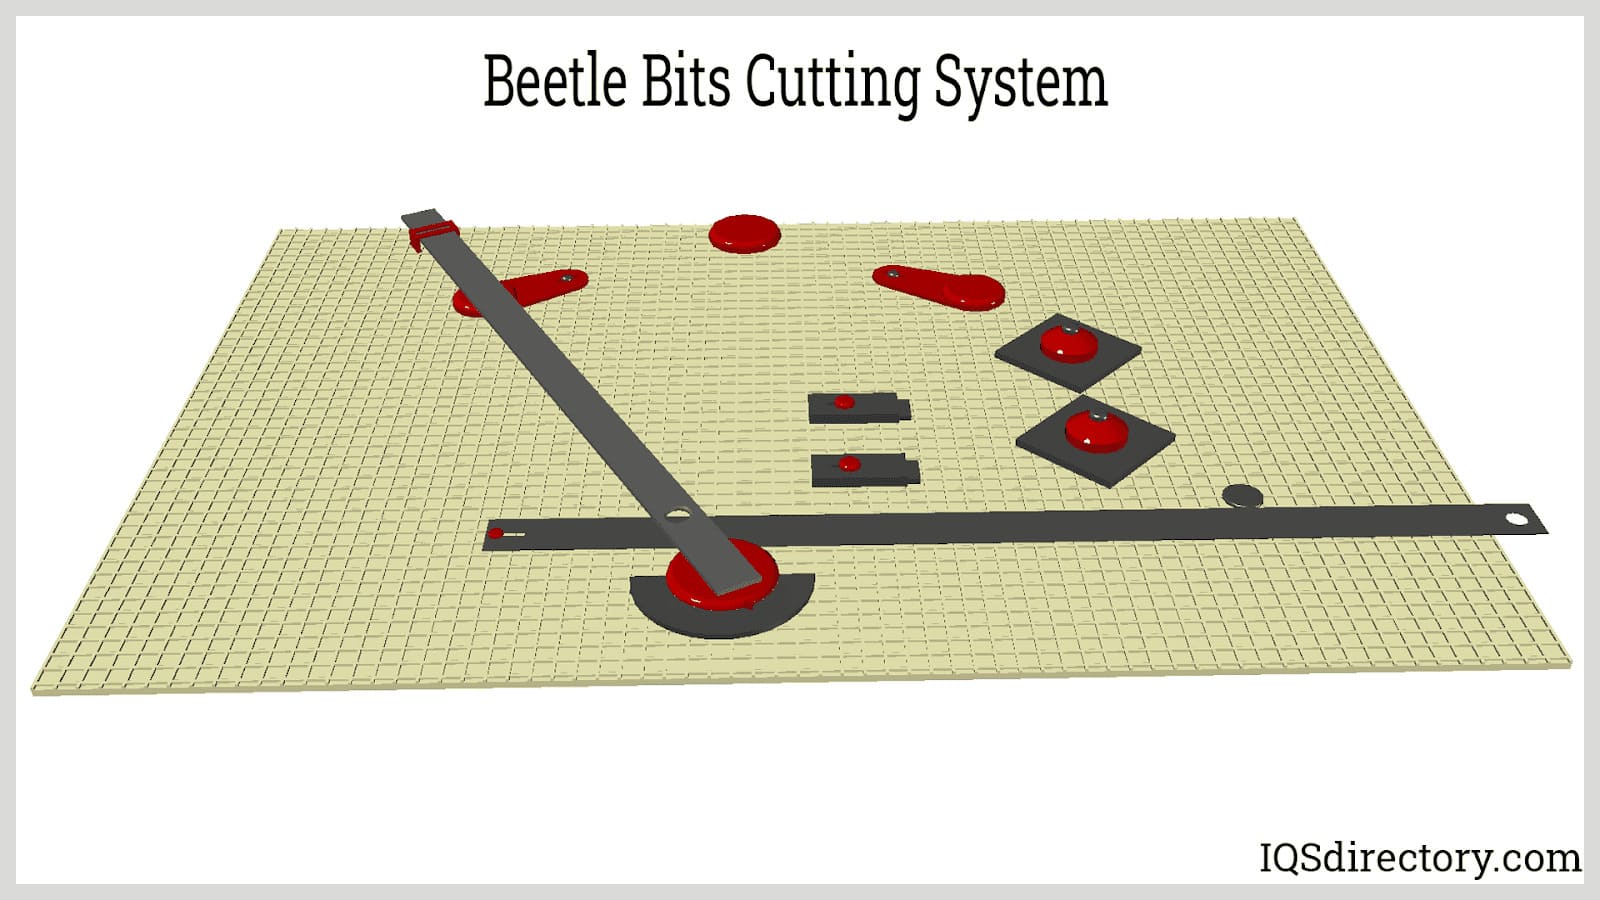 Beetle Bits Cutting System